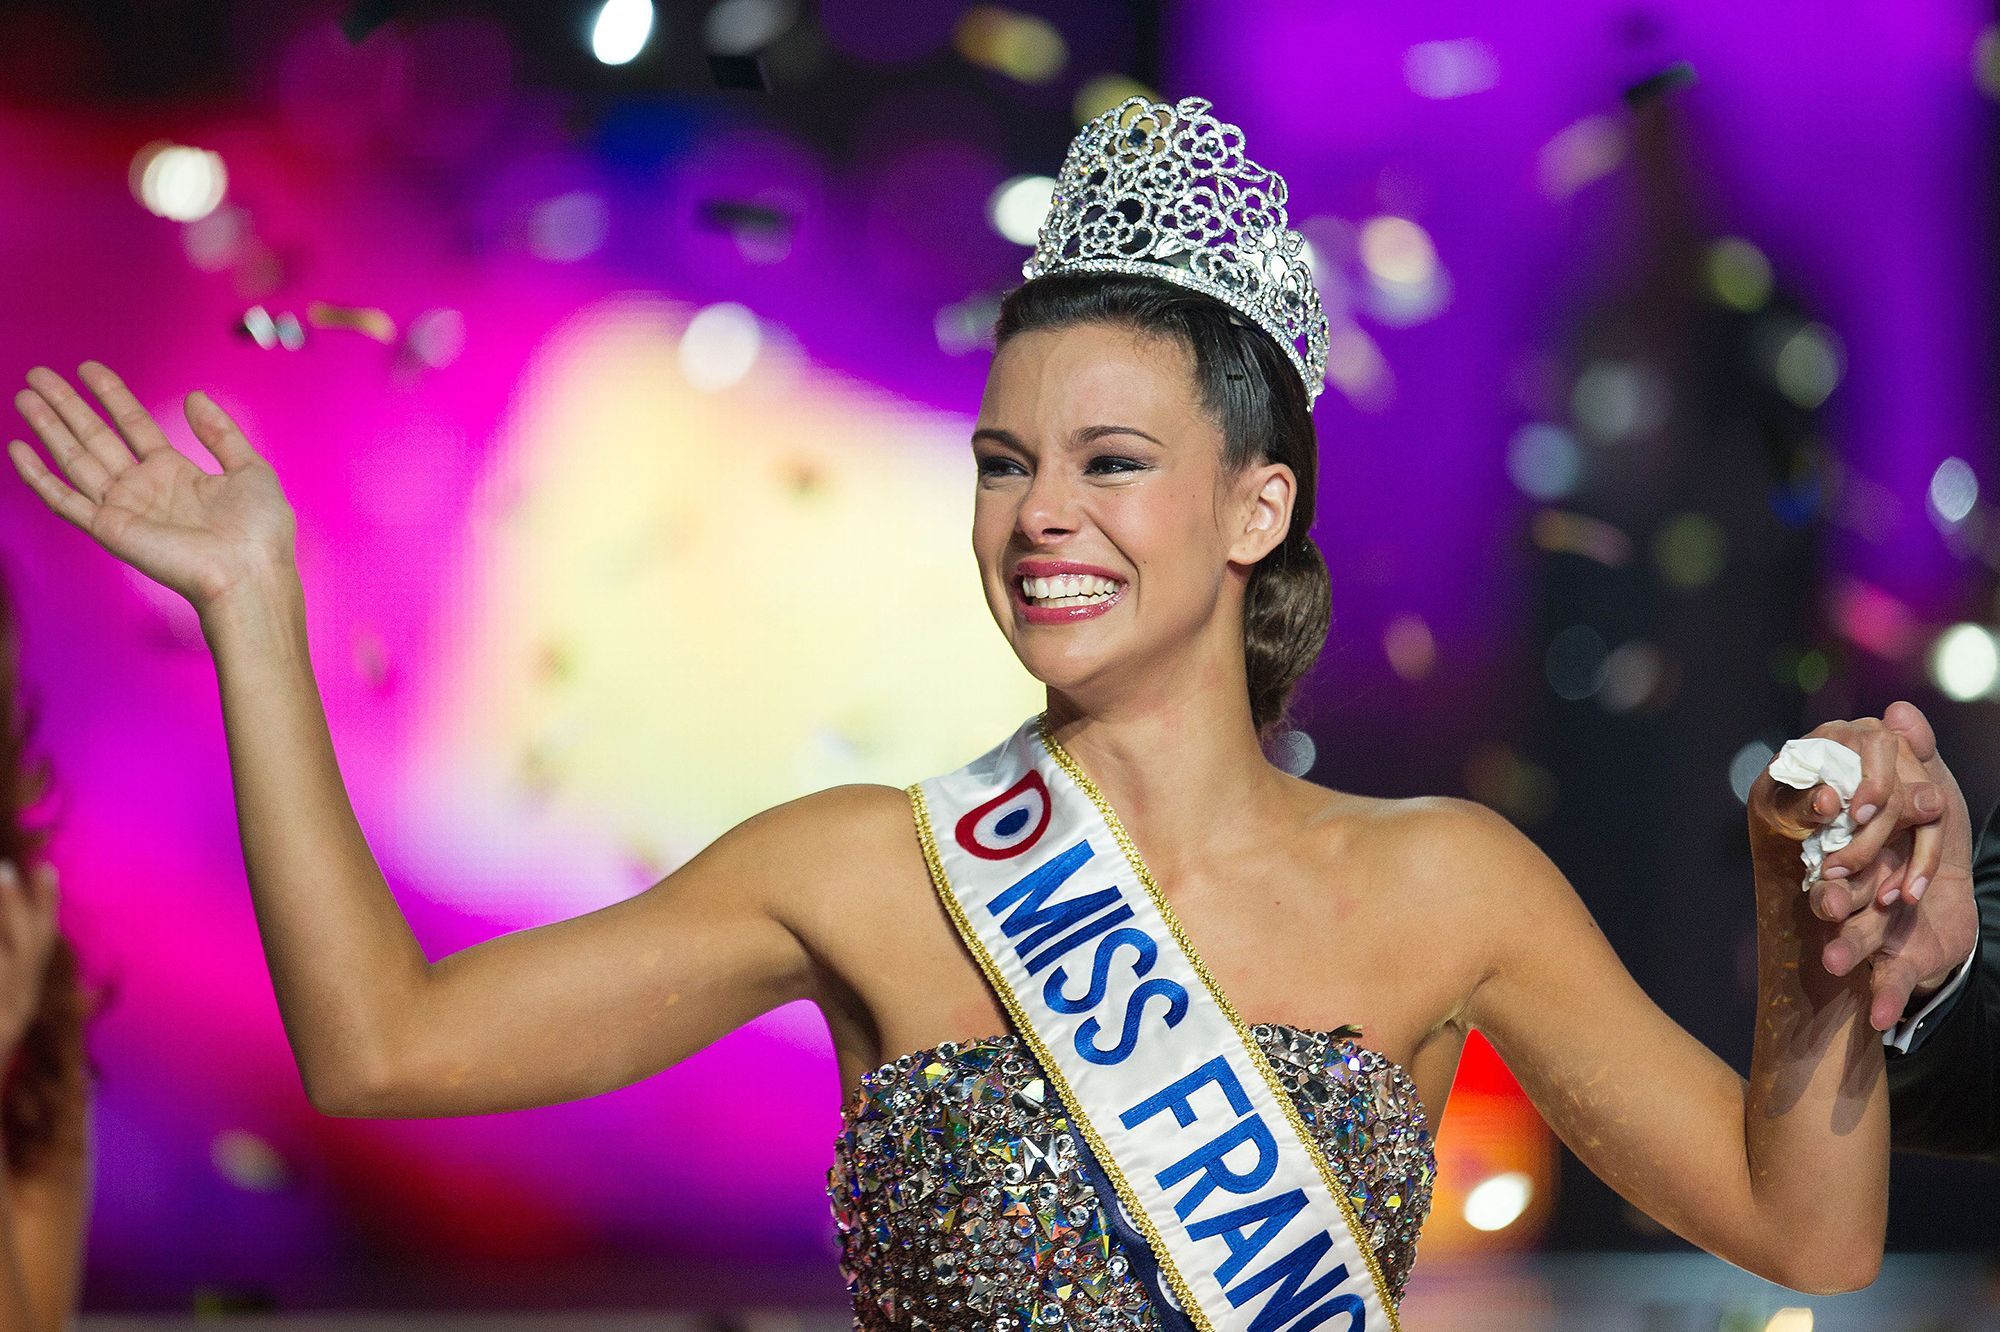 Valrie pascal miss france maitre costa image